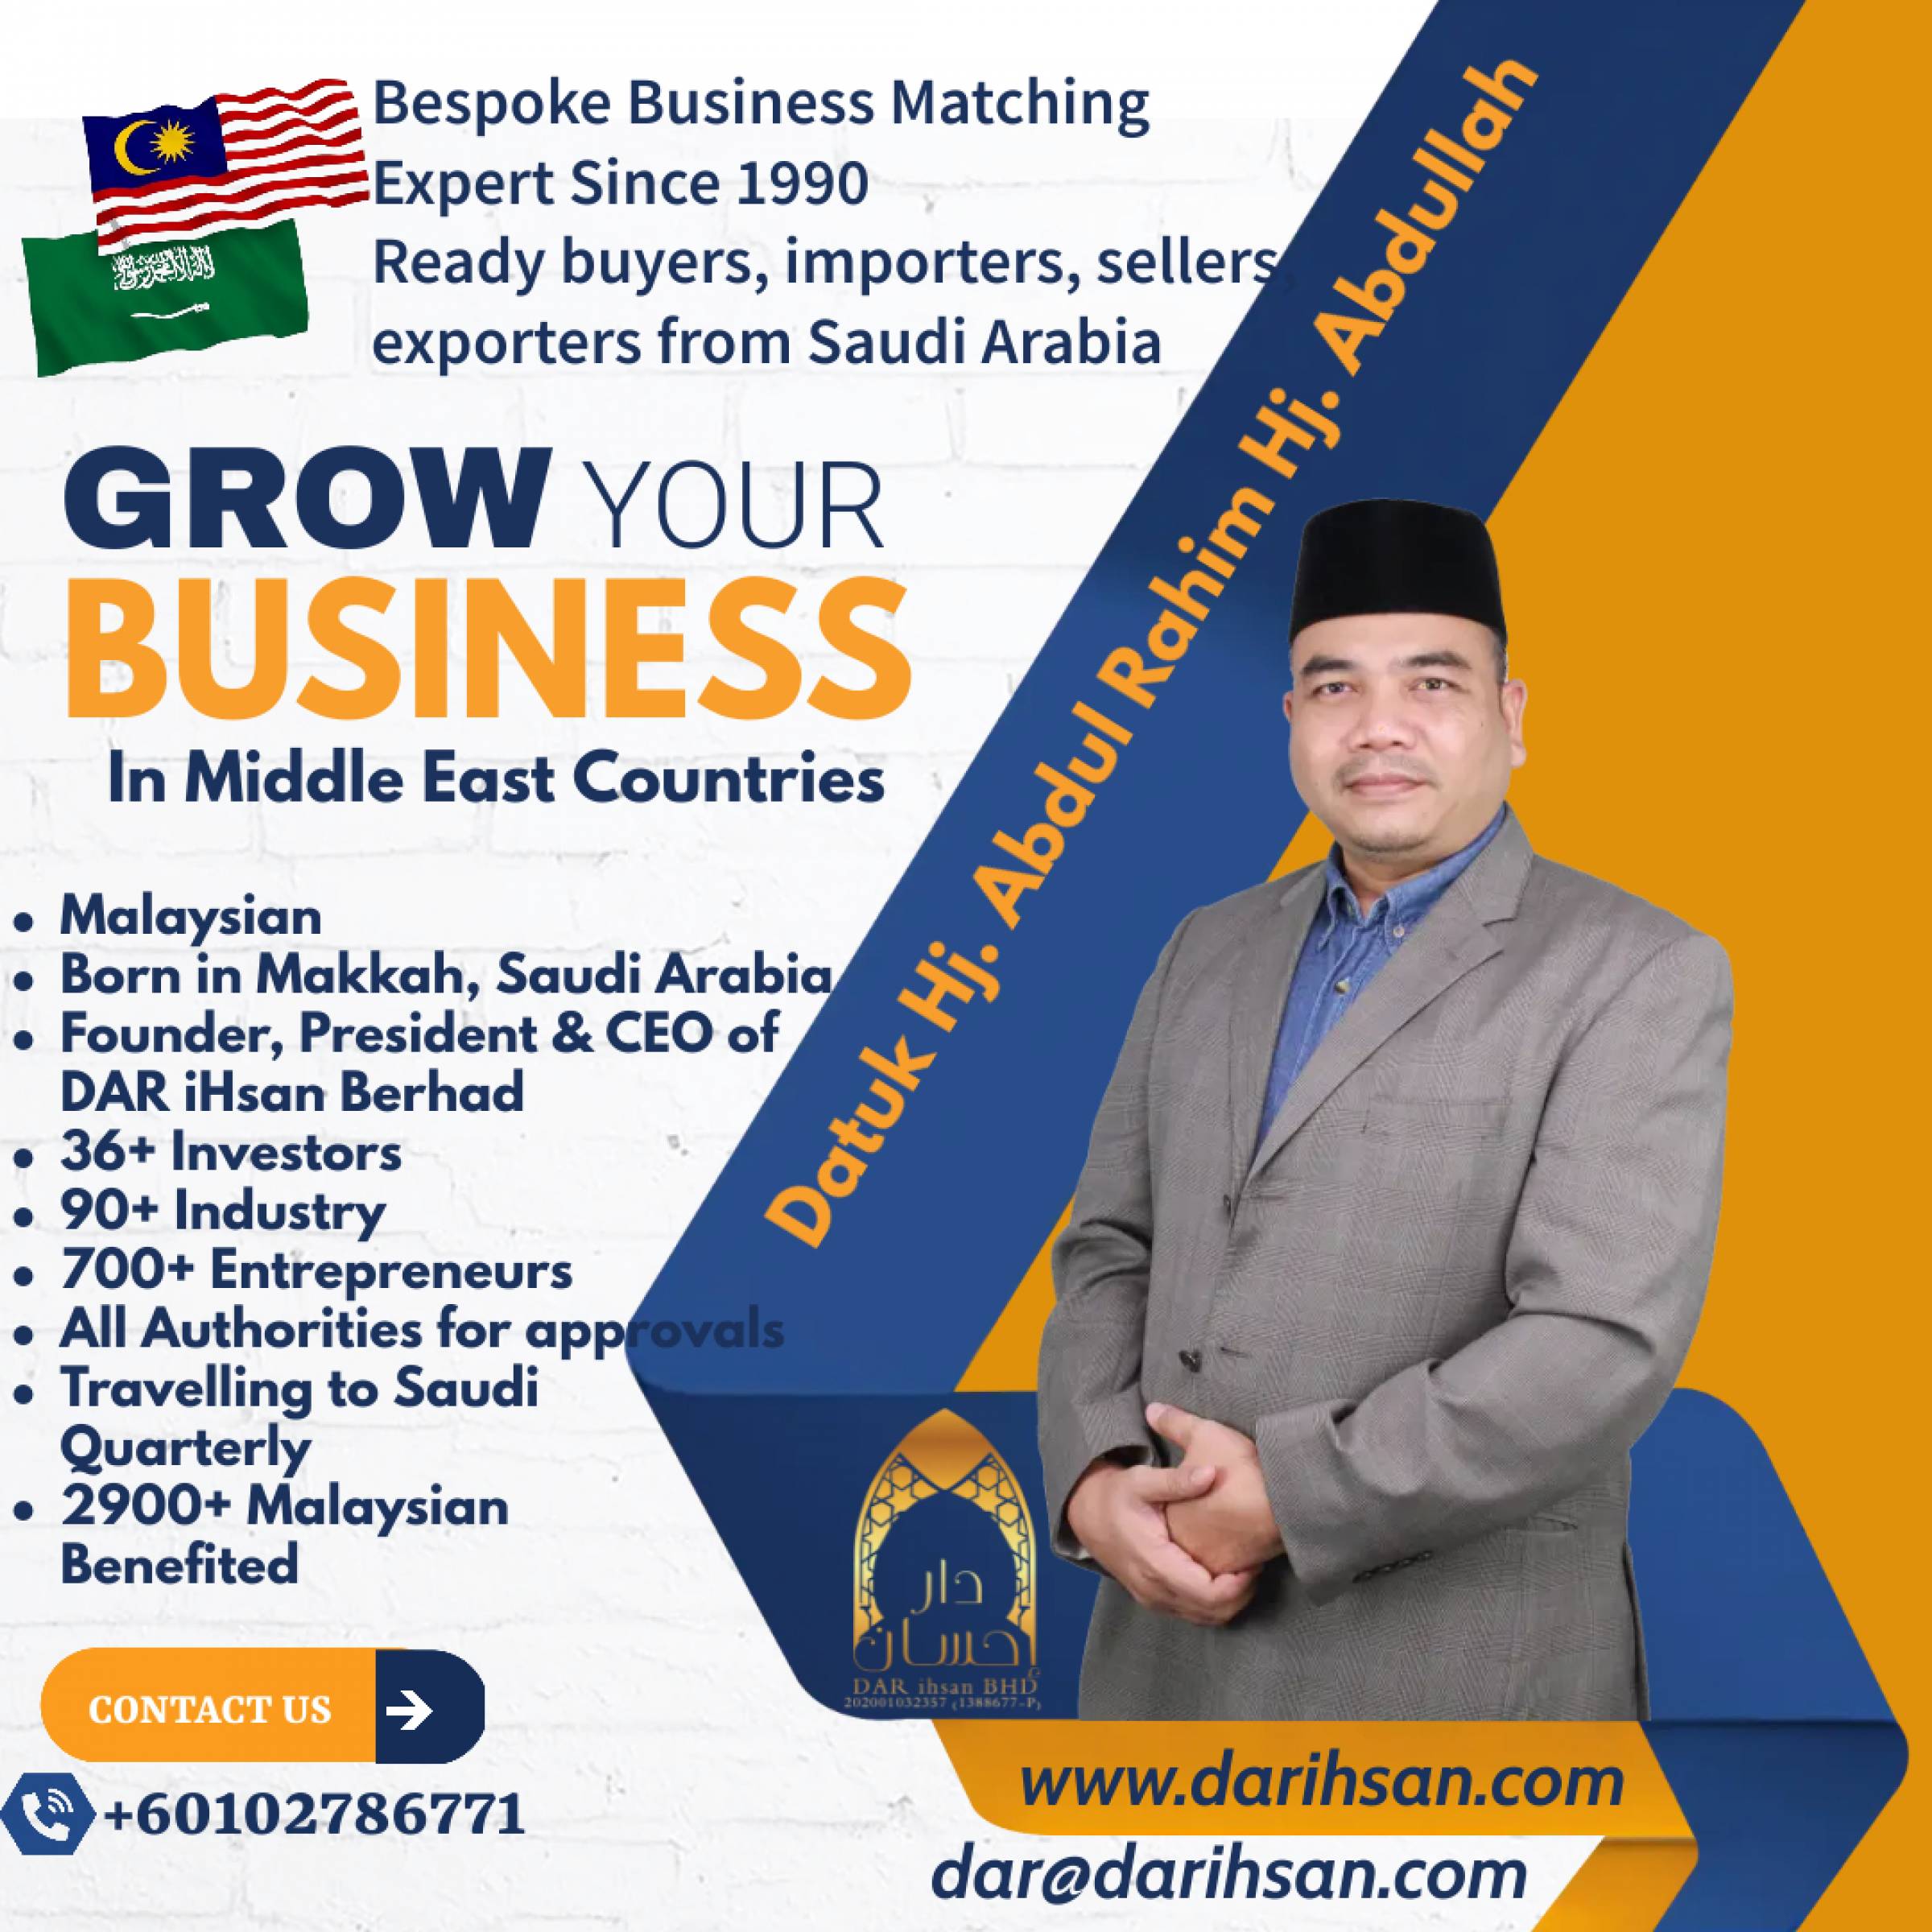 e2e BUSINESS CONSULTING SEA to MIDDLE EAST